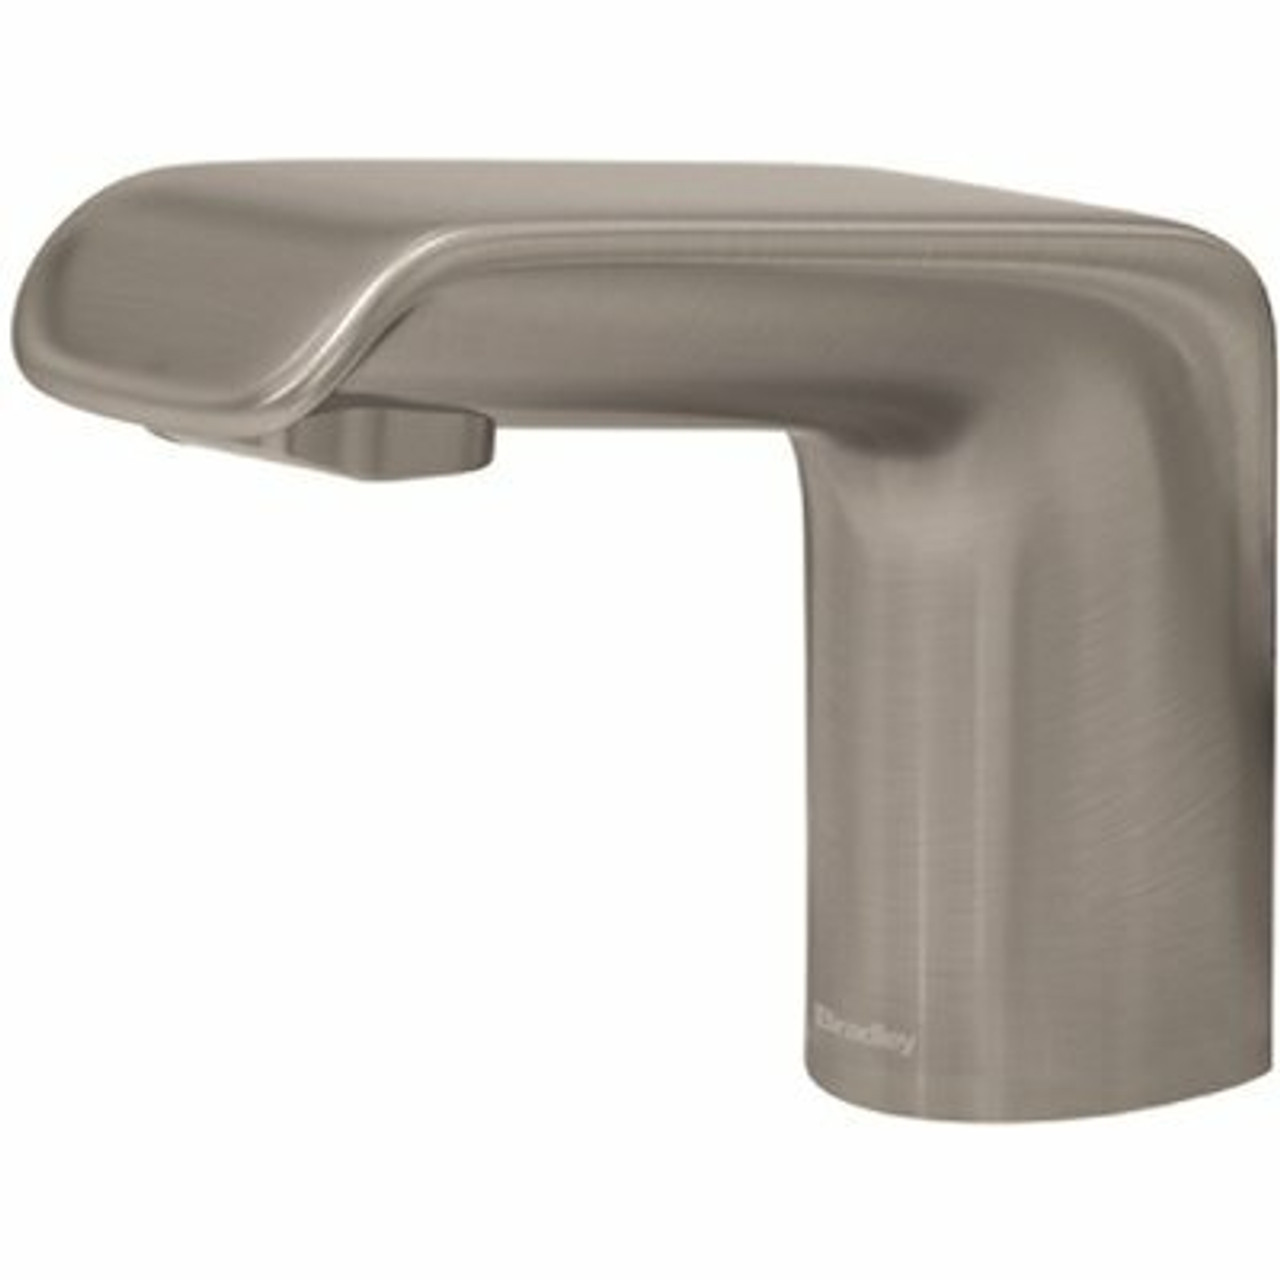 Bradley Linea Verge Faucet In Brushed Stainless - 313831528